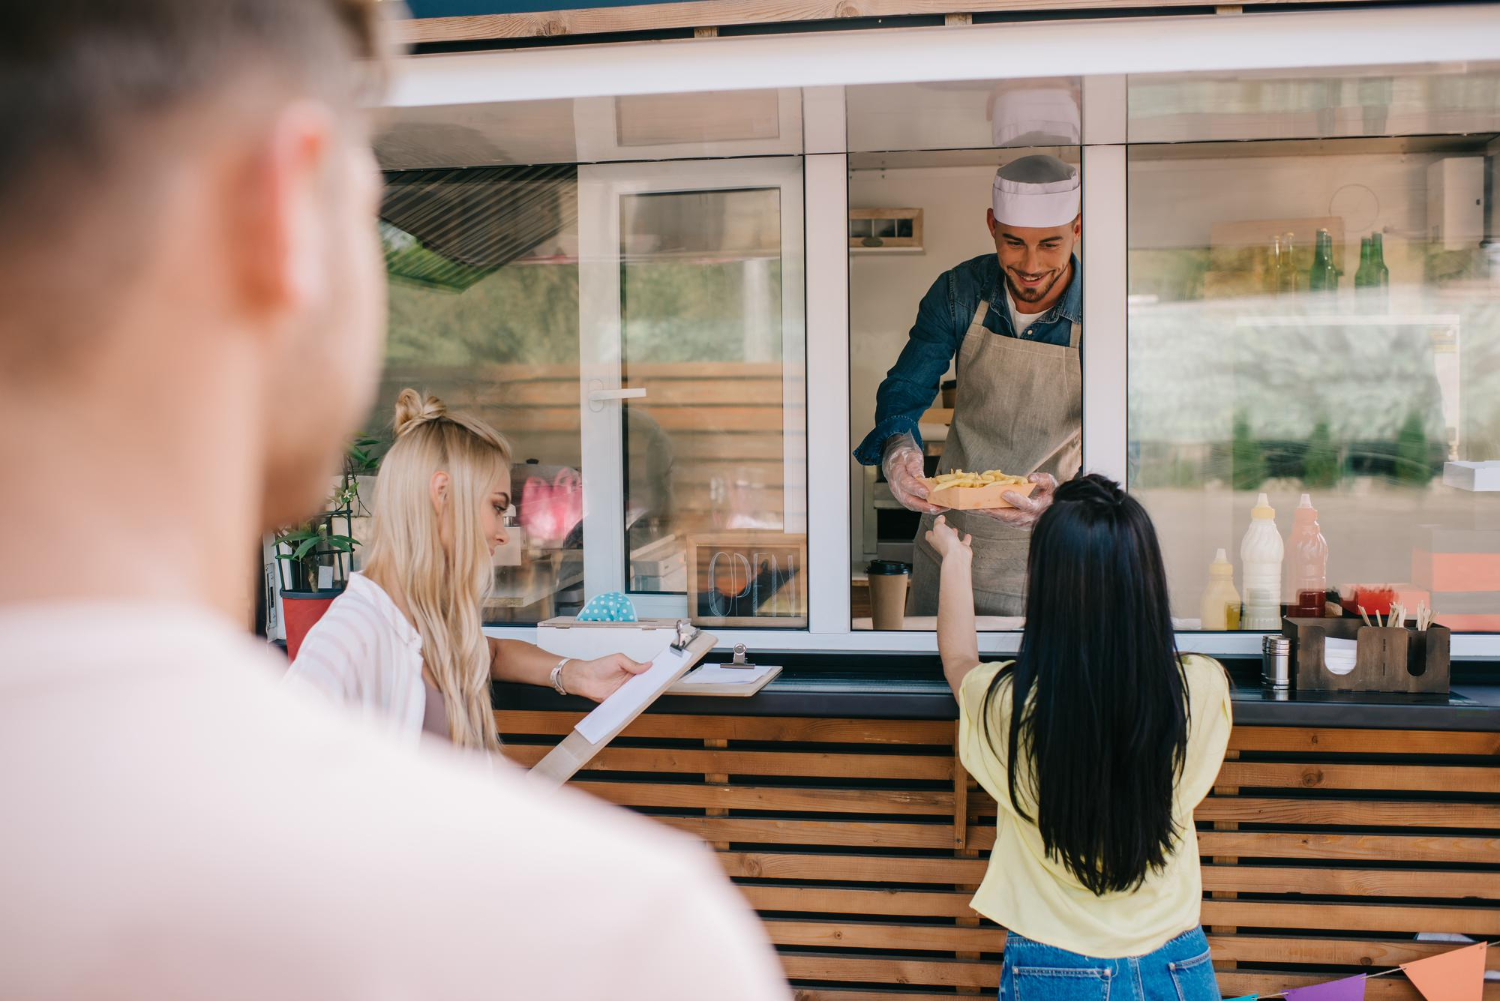 Customers receive their food orders and read the menu at a food truck service window.